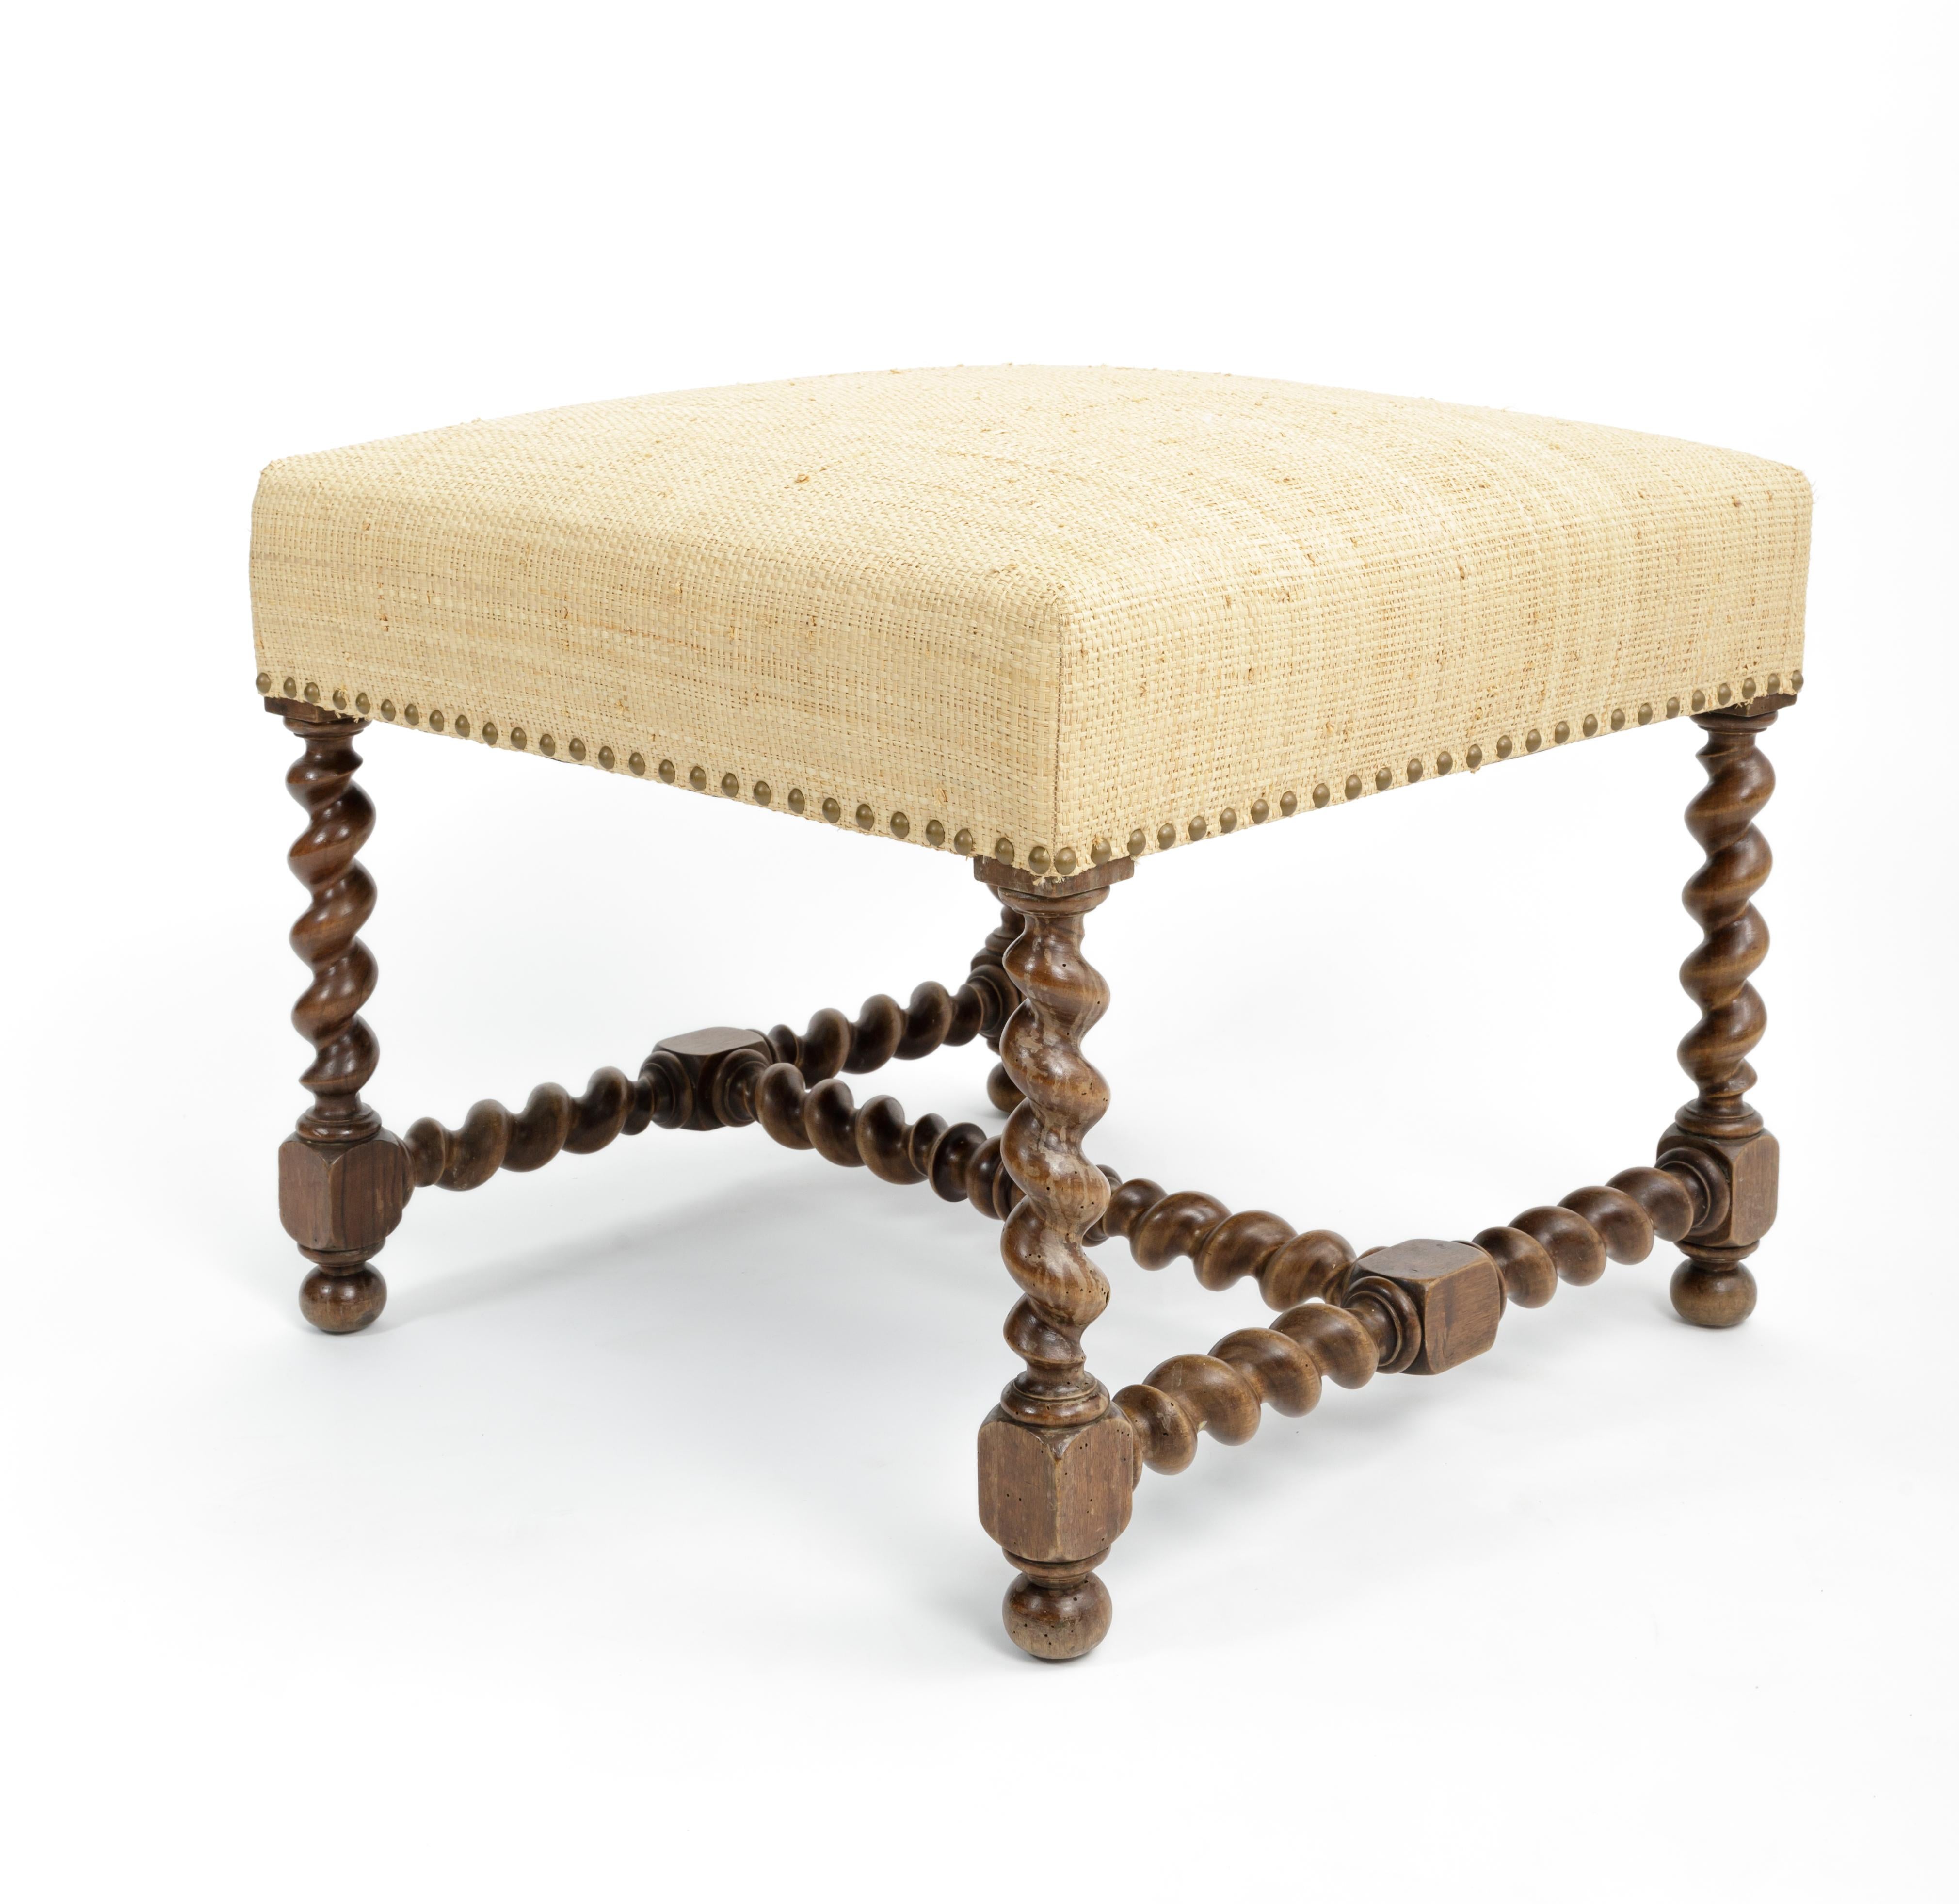 European Antique Barley Twist Stool with Cream Linen Upholstery, Europe, 19th Century For Sale